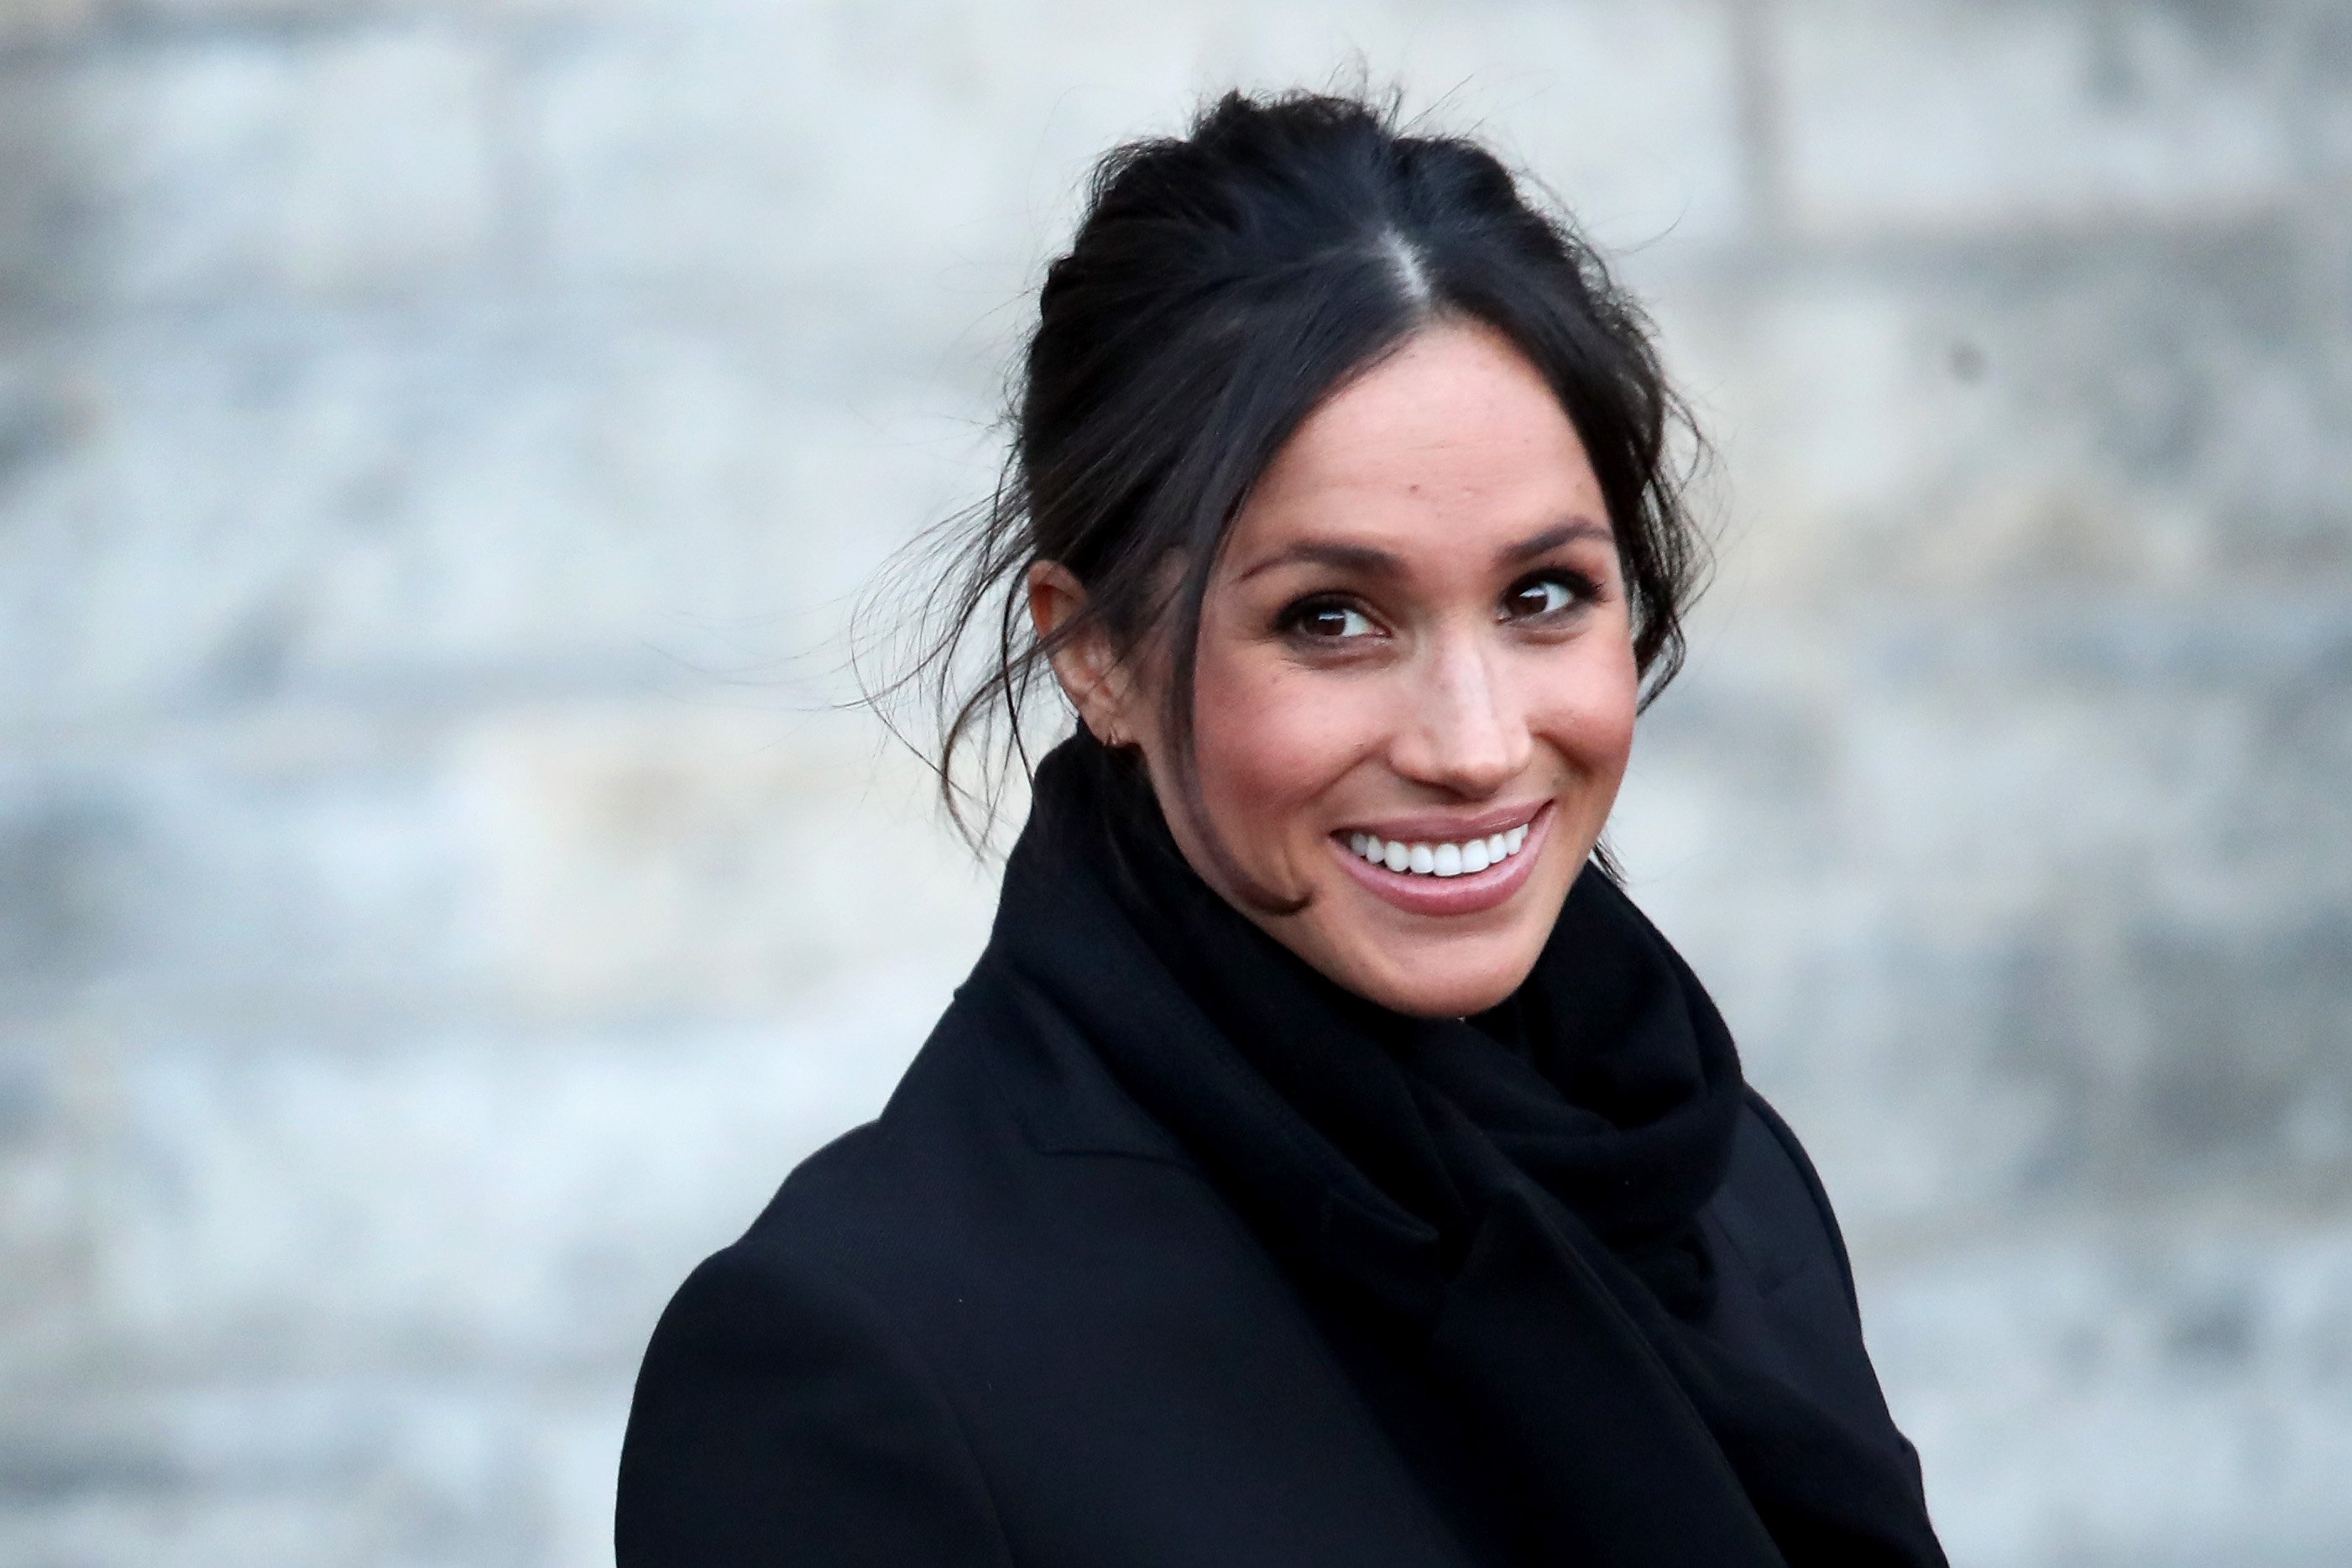 Meghan Markle smiles while wearing a black outfit.